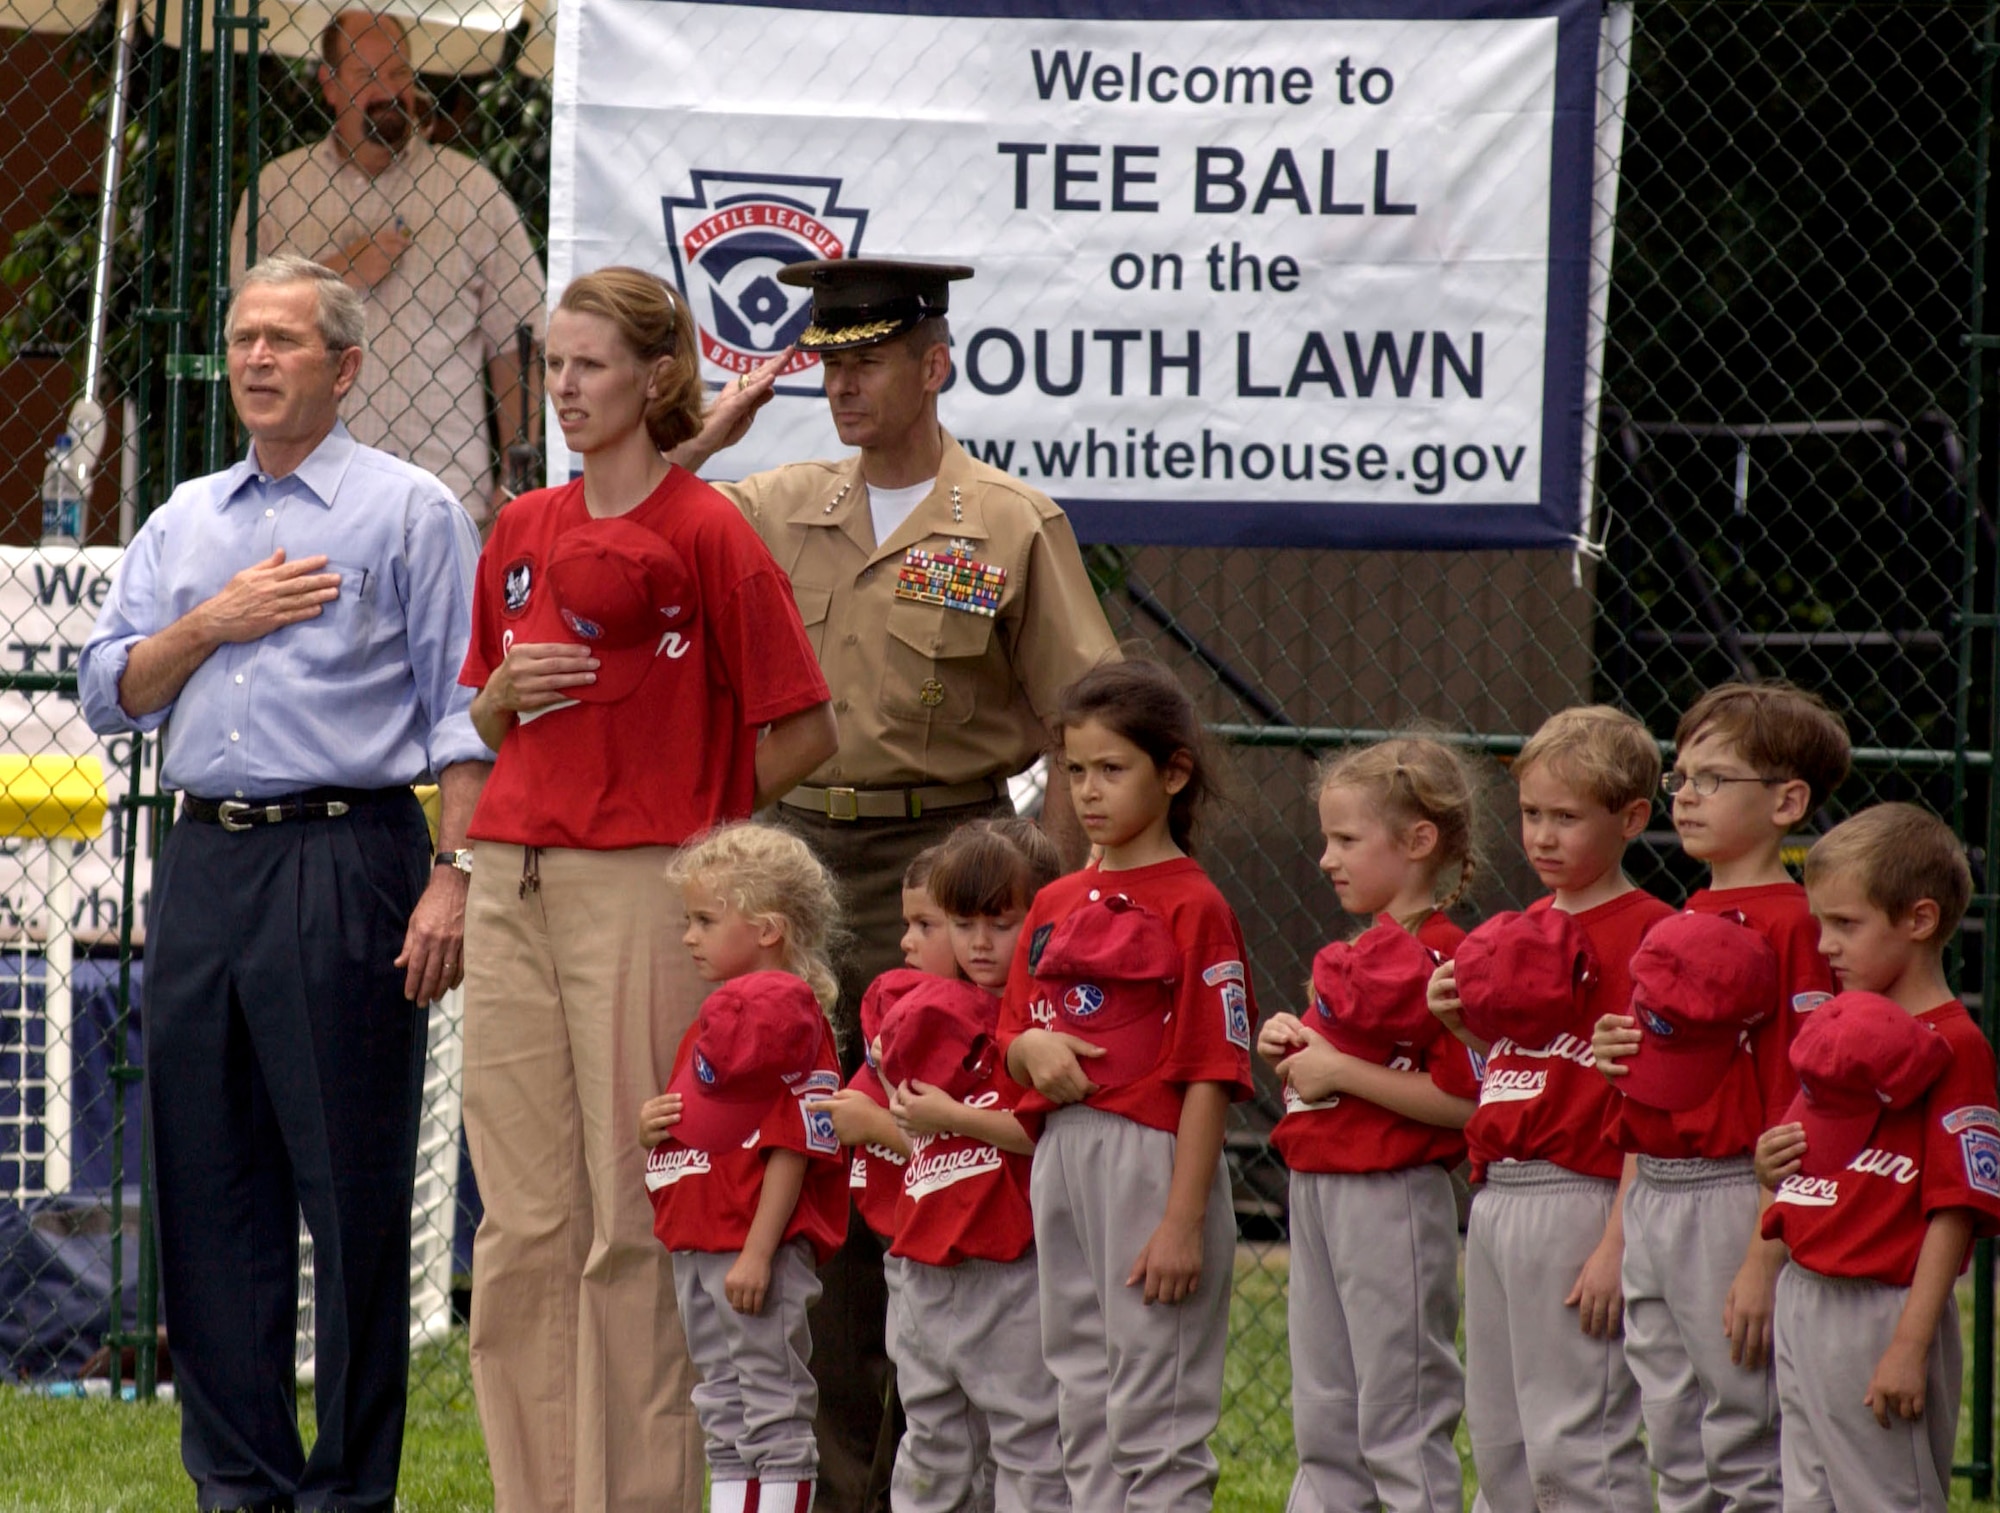 President George W. Bush, Danielle McPeak, Gen. Peter Pace, chairman of the Joint Chiefs of Staff and the Yankees Little League team from McGuire Air Force Base, N.J., stand during the National Anthem on the South Lawn of the White House on Friday, June 23. The ceremony marked the official start of the Little League season. Ms. McPeak is manager of the McGuire team. (U.S. Air Force photo/Tech. Sgt. Cohen A. Young)